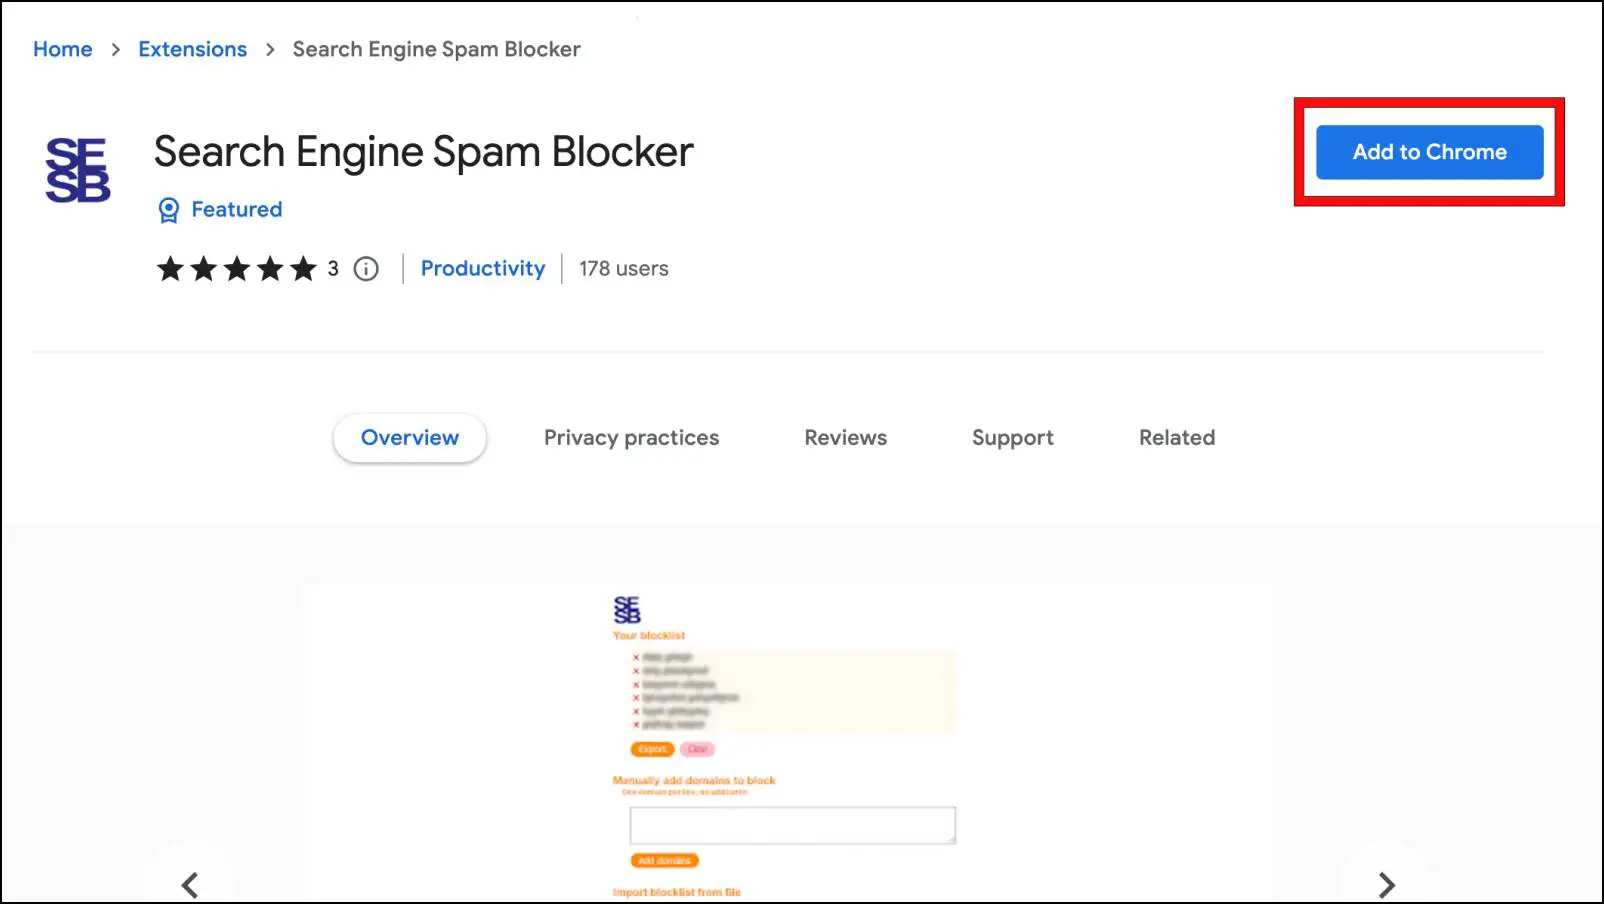 Download Search Engine Spam Blocker Extension